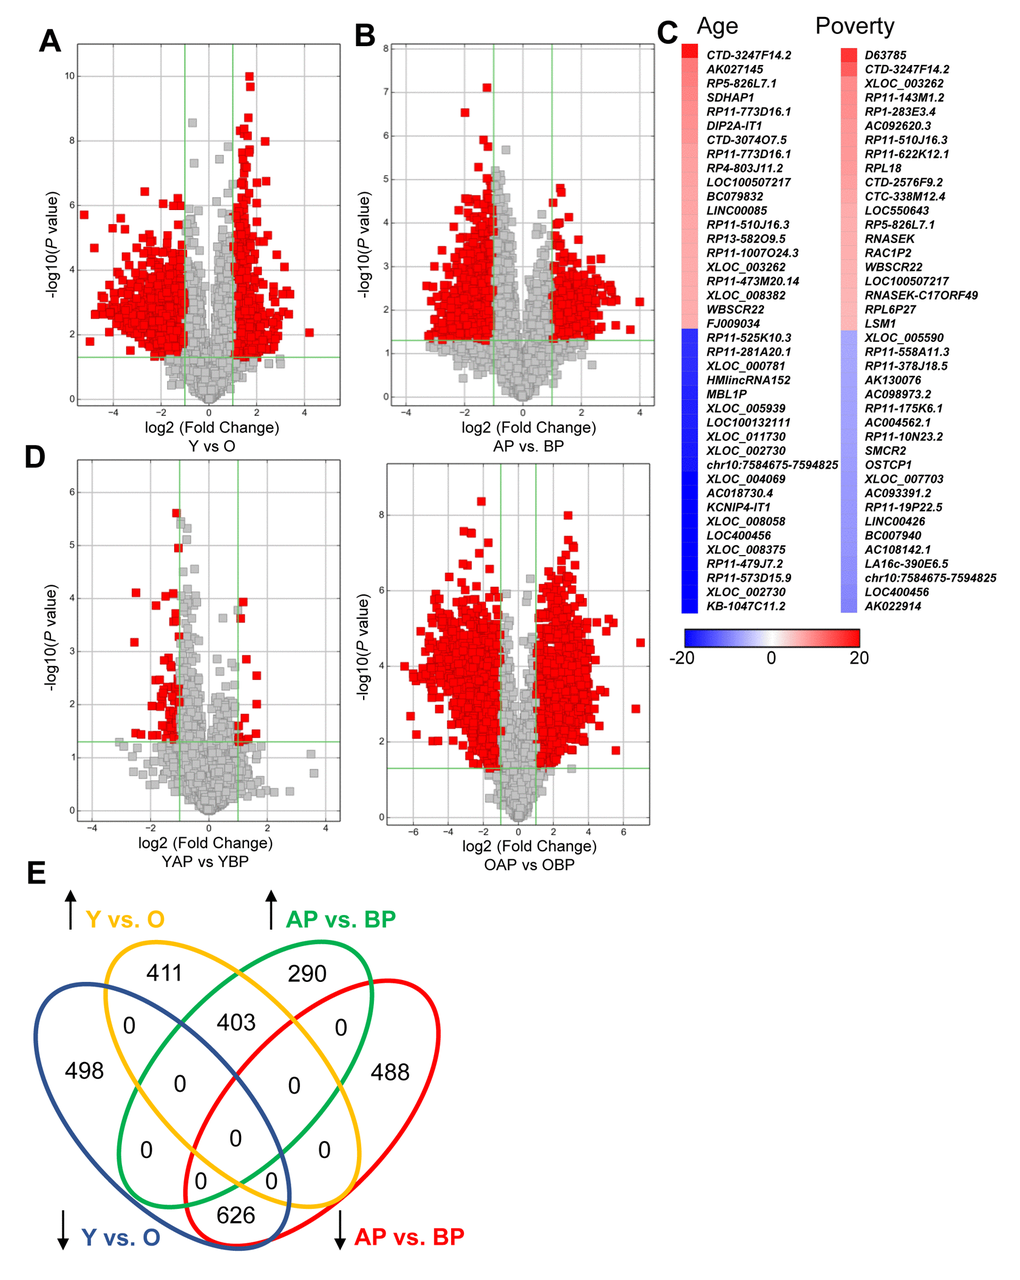 Changes in lncRNA abundance with age and poverty. The lncRNA expression levels in white young and old males (A) living above or below poverty (B) were assessed using microarrays (Table 1 for demographic details). Volcano plots show log2 fold change and P value for each lncRNA. Red indicates lncRNAs that were >2-fold change and P0.05. (A,B,D) lncRNA comparisons between groups are indicated. (C) Heat maps indicate the top fold changed lncRNAs with age and poverty. These lncRNAs are also listed in Tables 2 and 3. (E) Venn diagram of the total number of significantly increased or decreased lncRNAs for each comparison. Y, young; O, old, AP, above poverty; BP, below poverty.